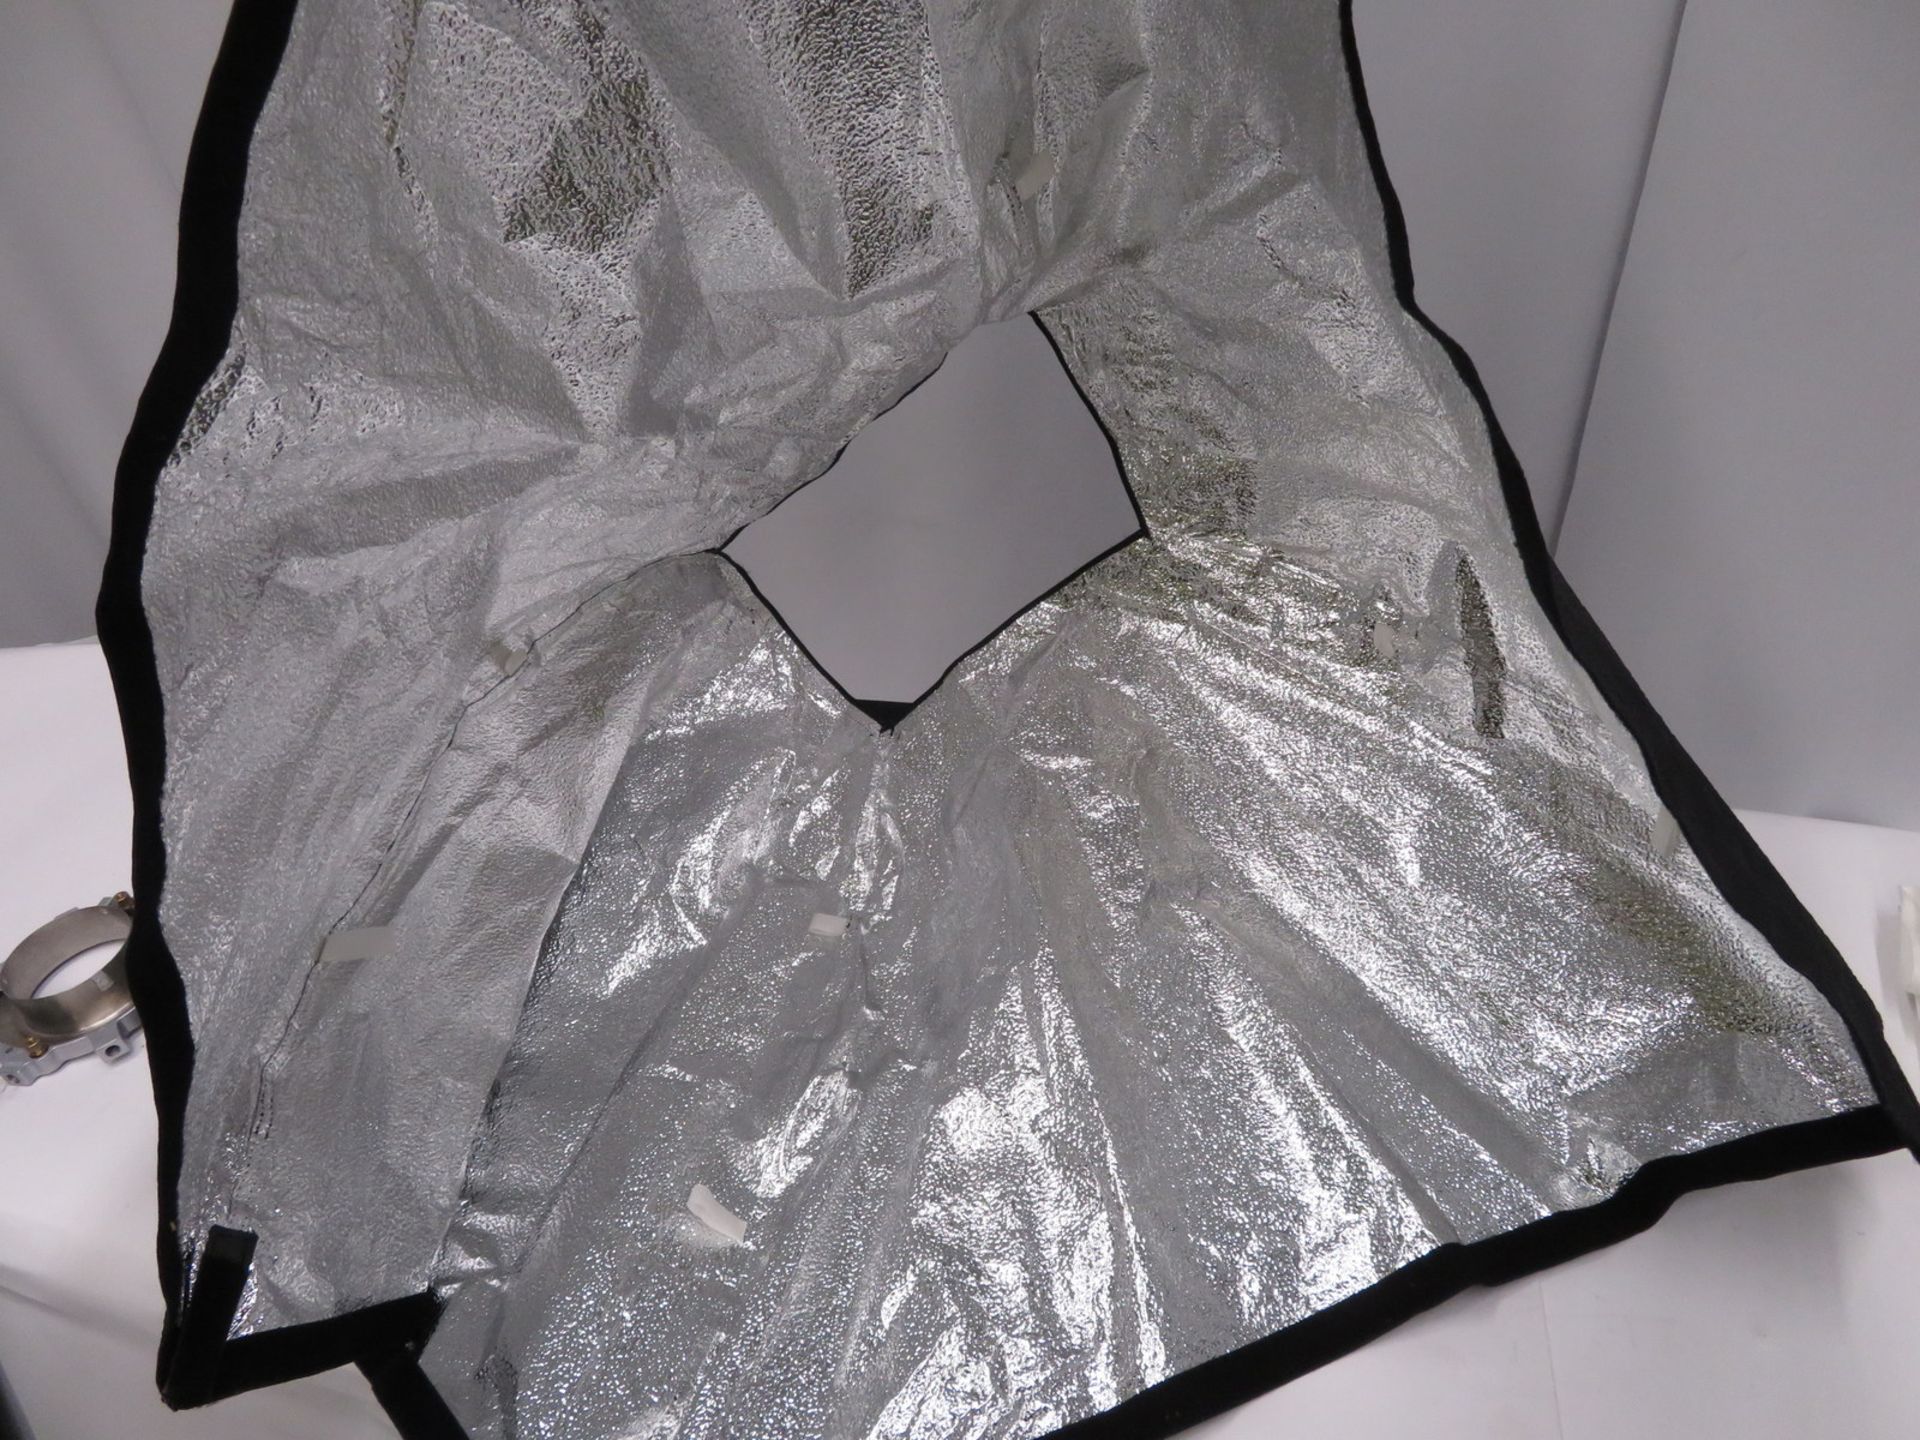 Bowens 1m x 1m softbox attachment for studio light in carry bag - Image 7 of 7